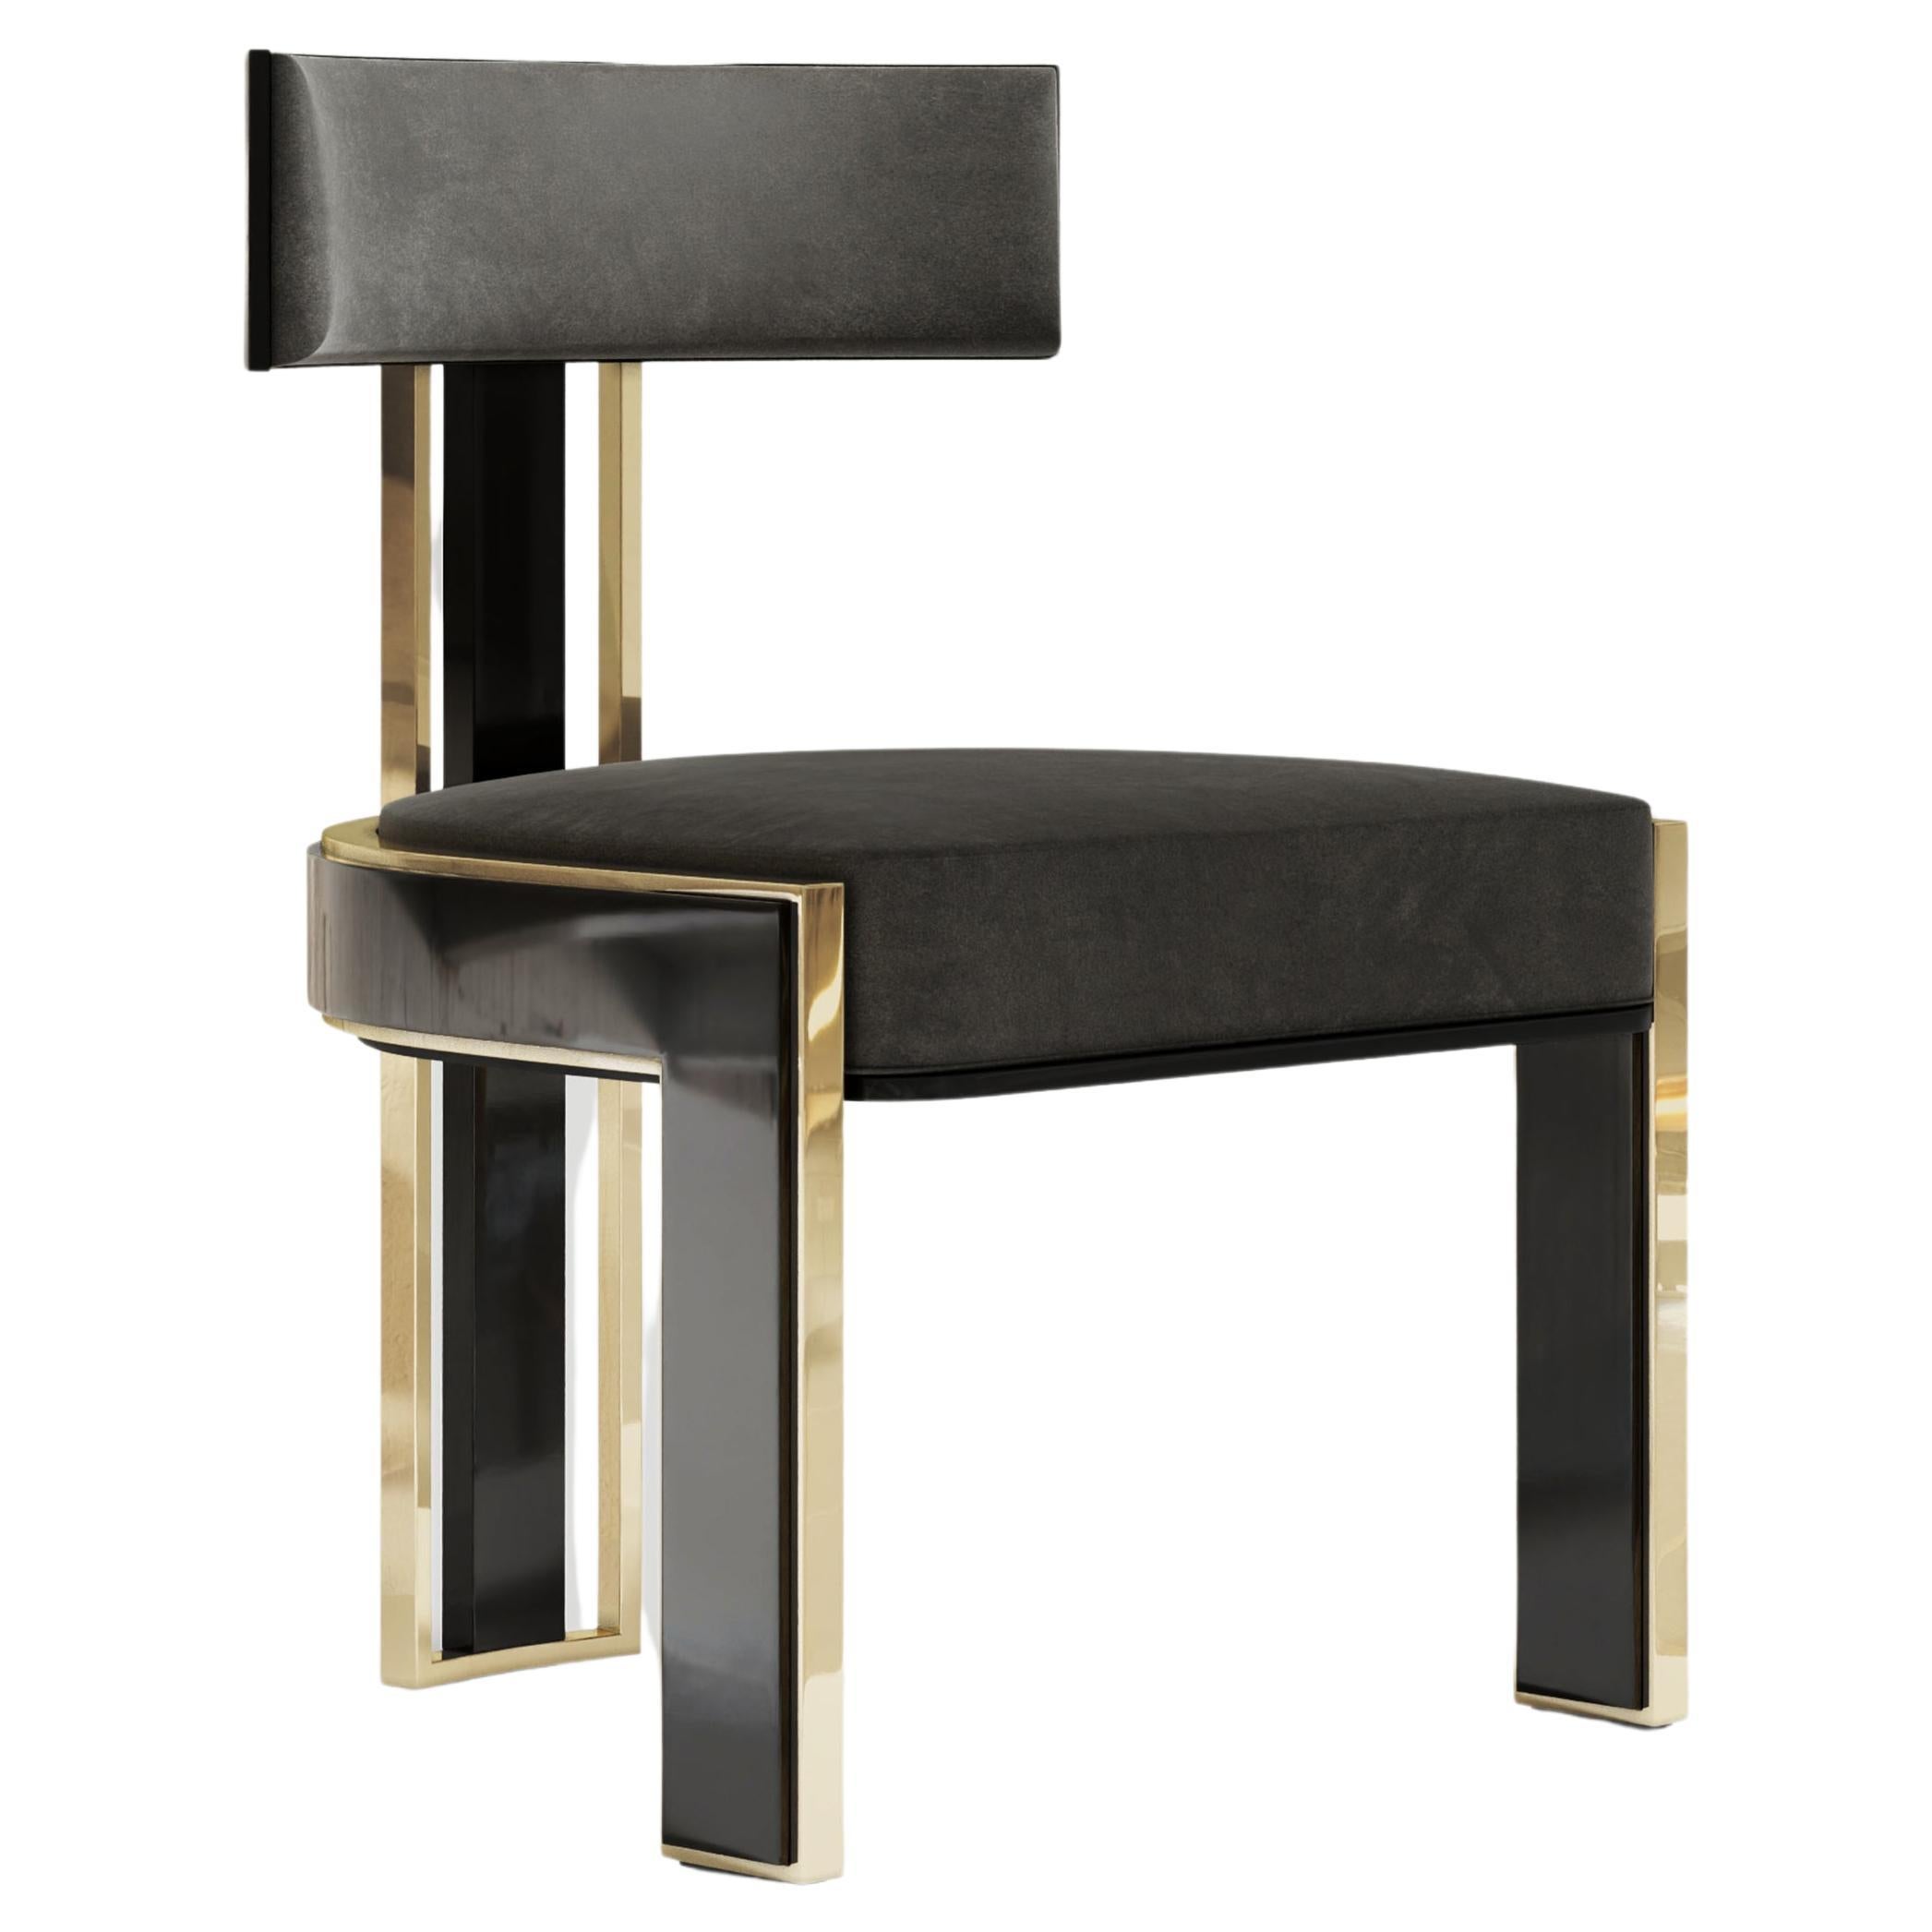 Bellus Dining Chair in Black Lacquer and Polished Bronze by Palena Furniture